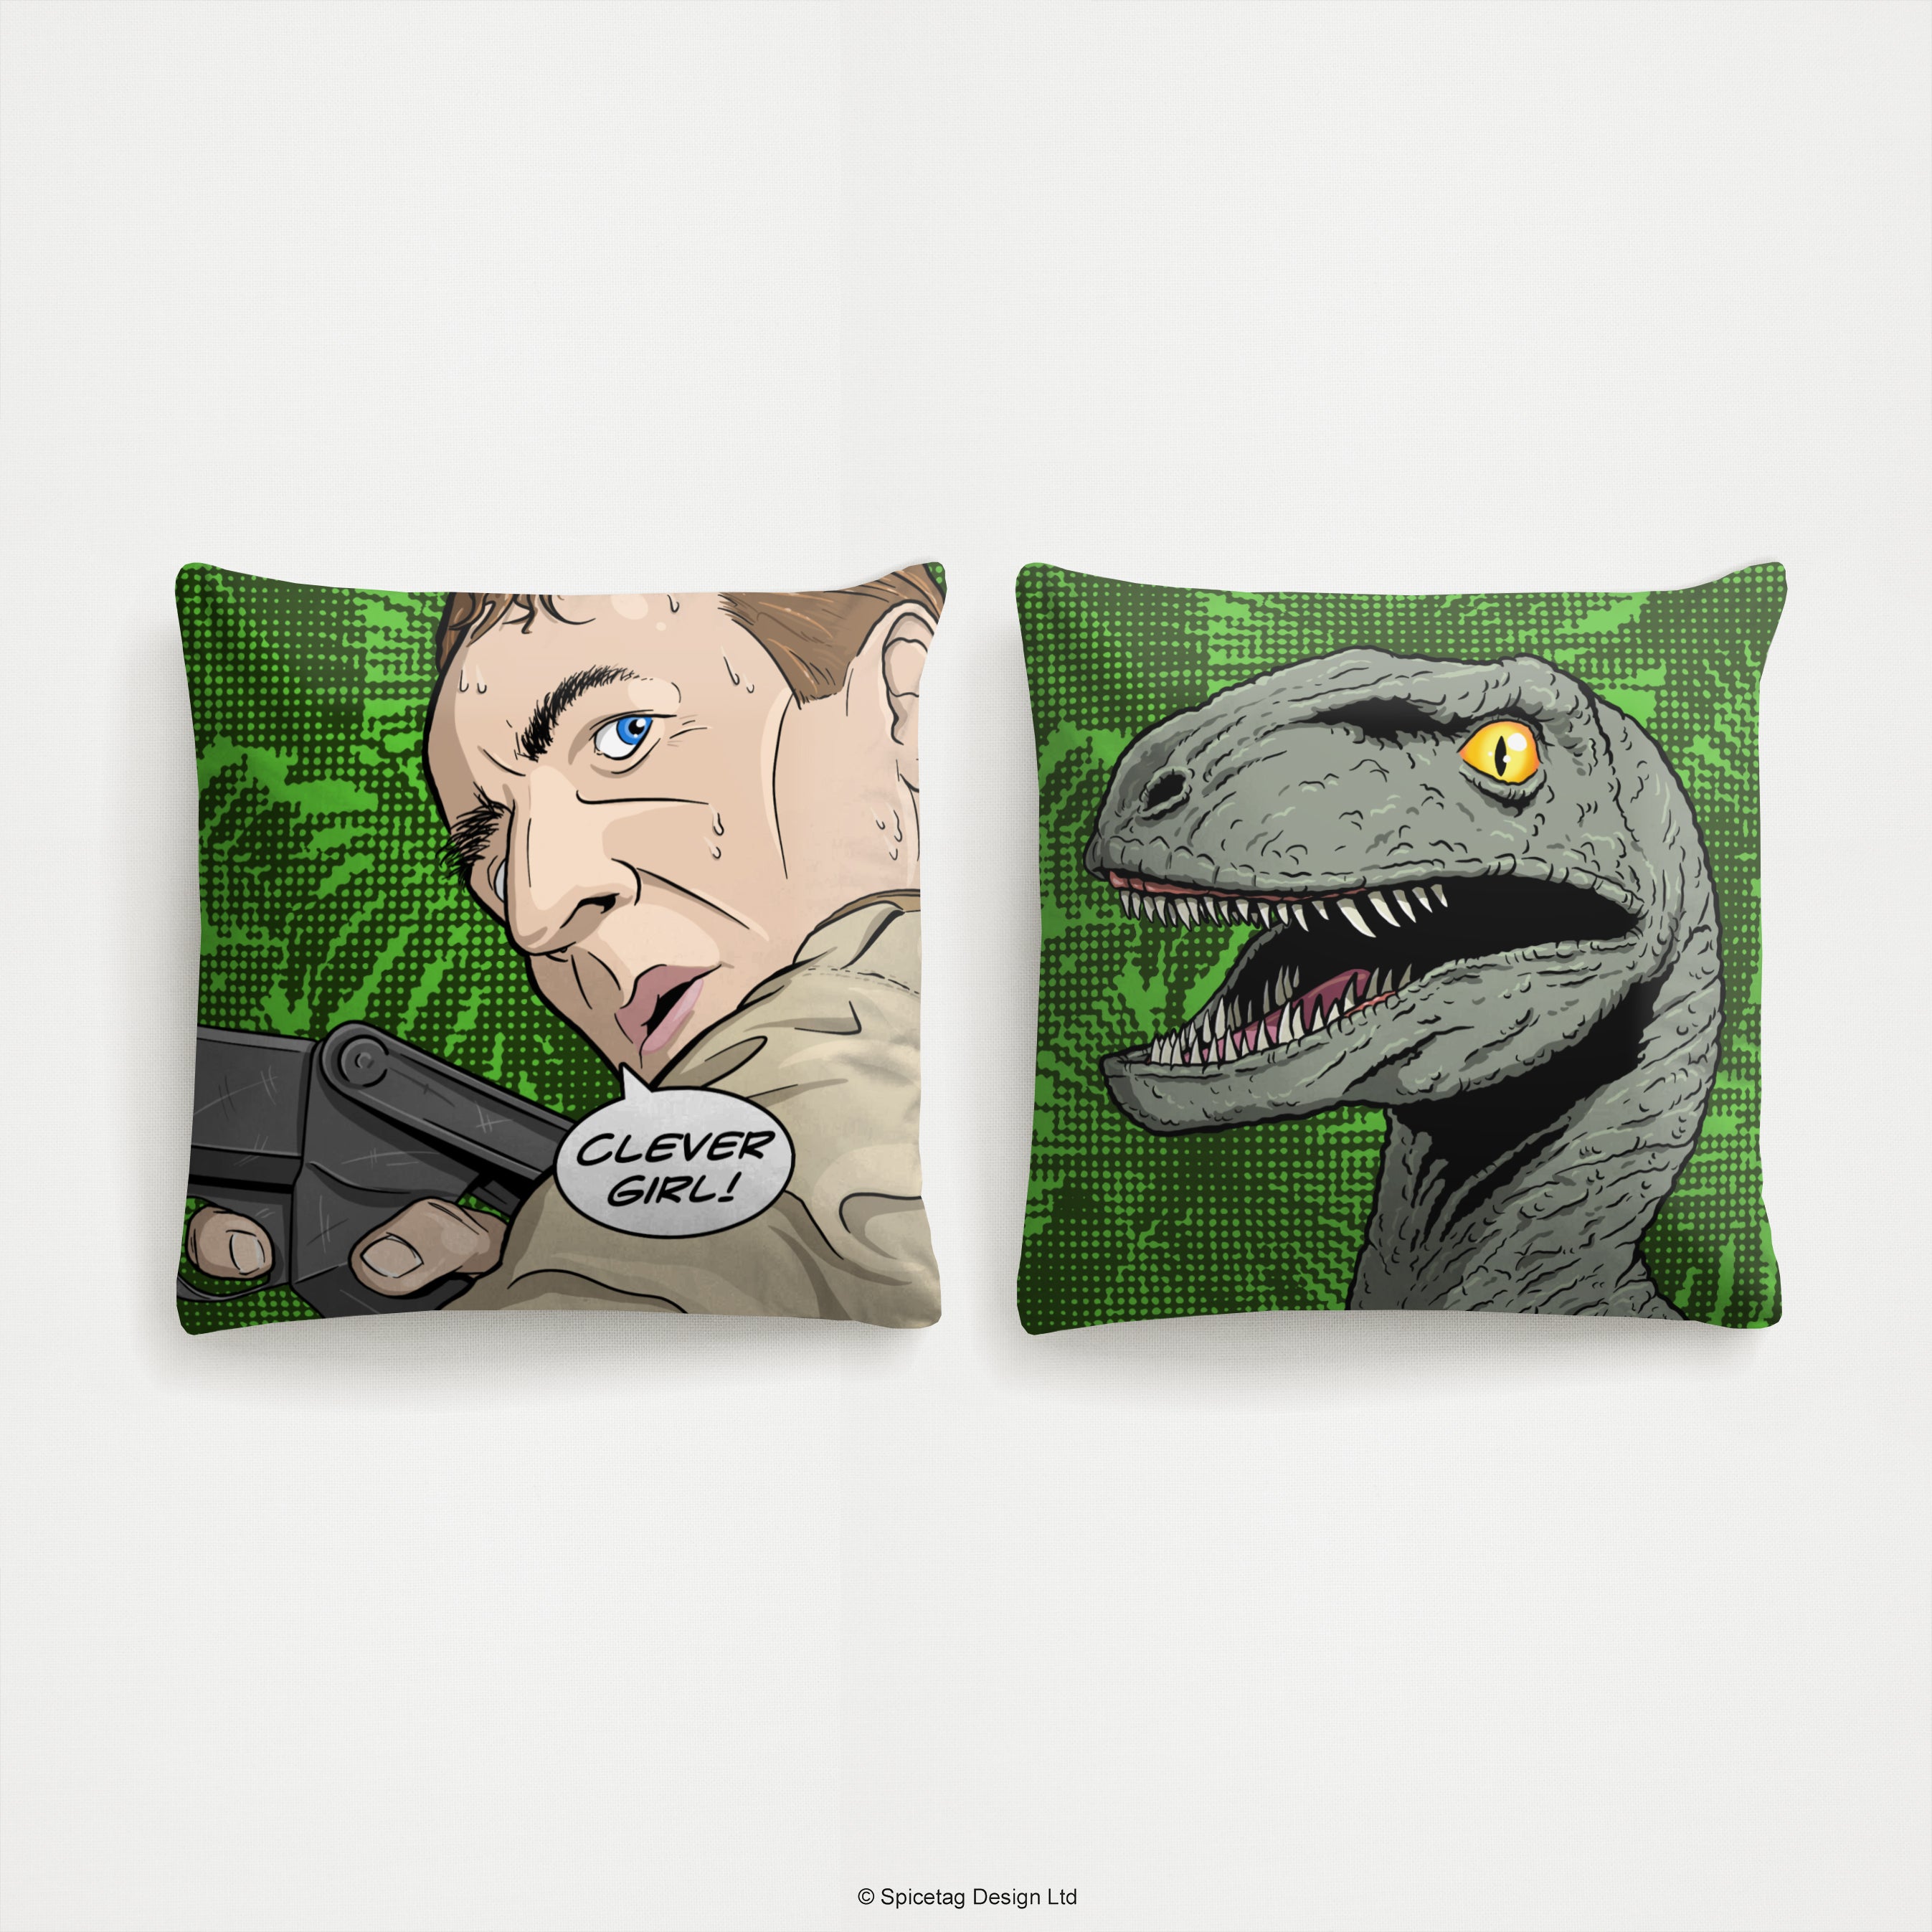 Clever Girl Cushion Set